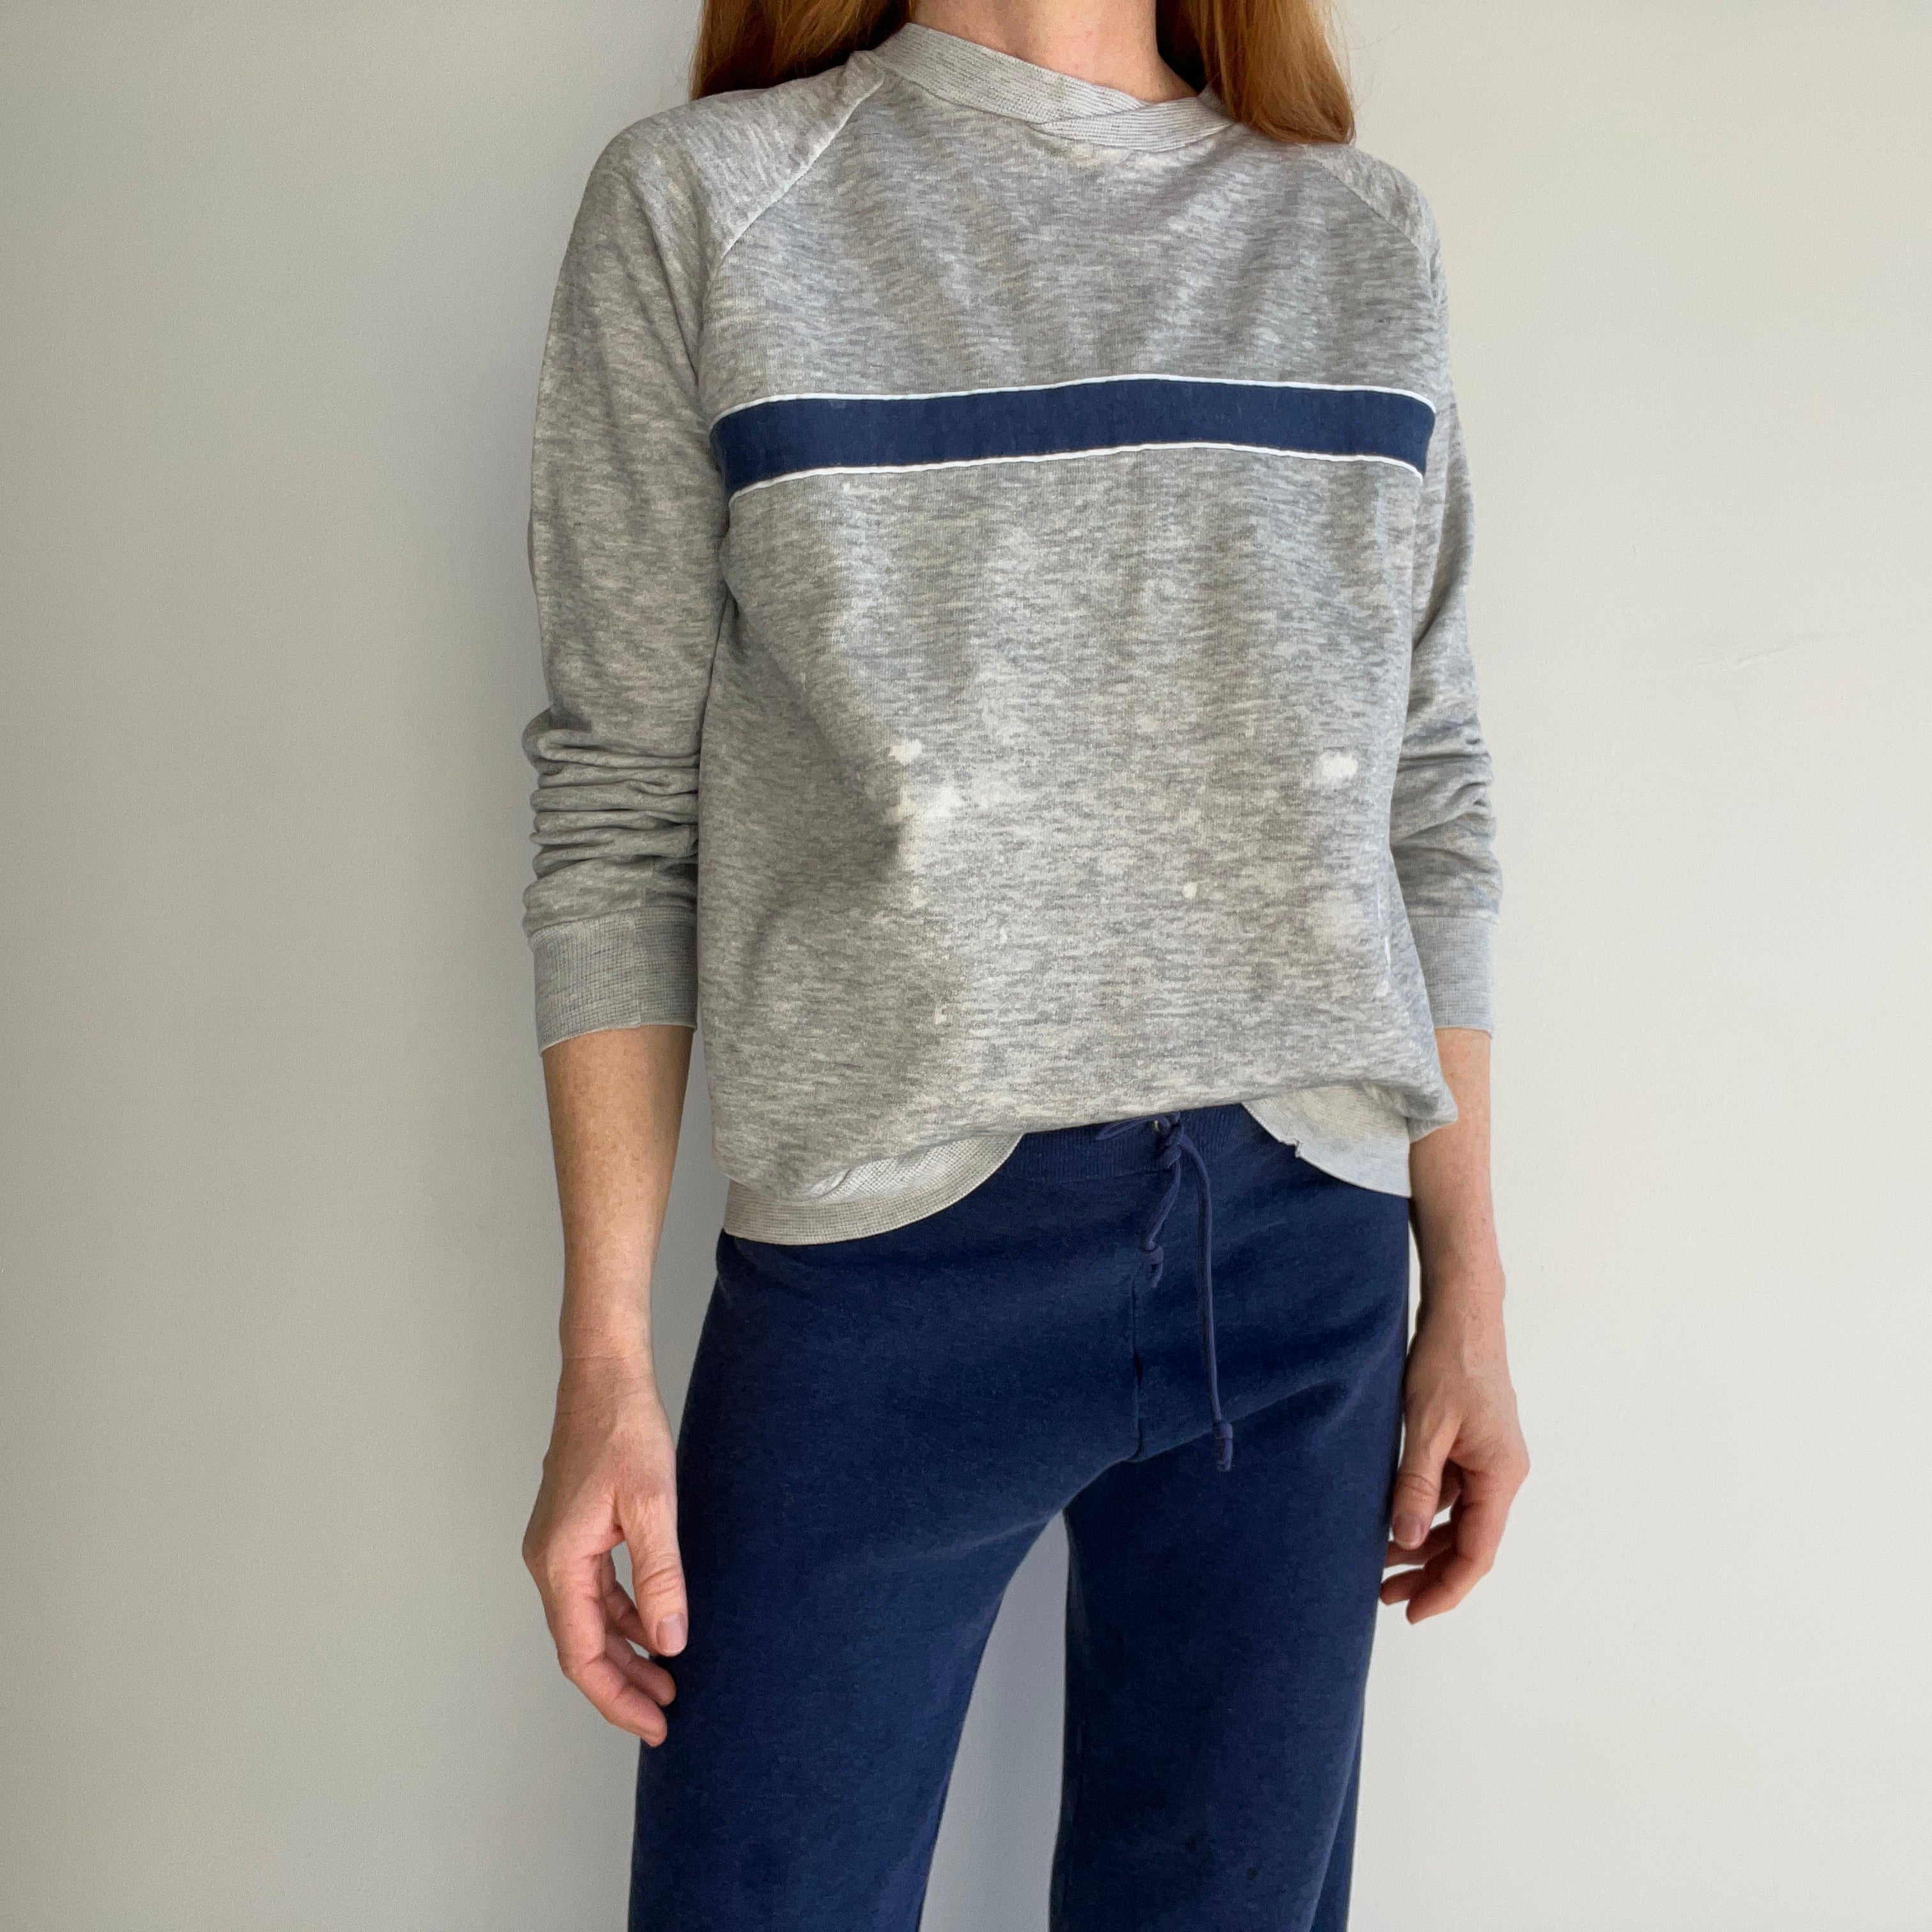 1980s Blank Striped Sweatshirt with Faint Staining